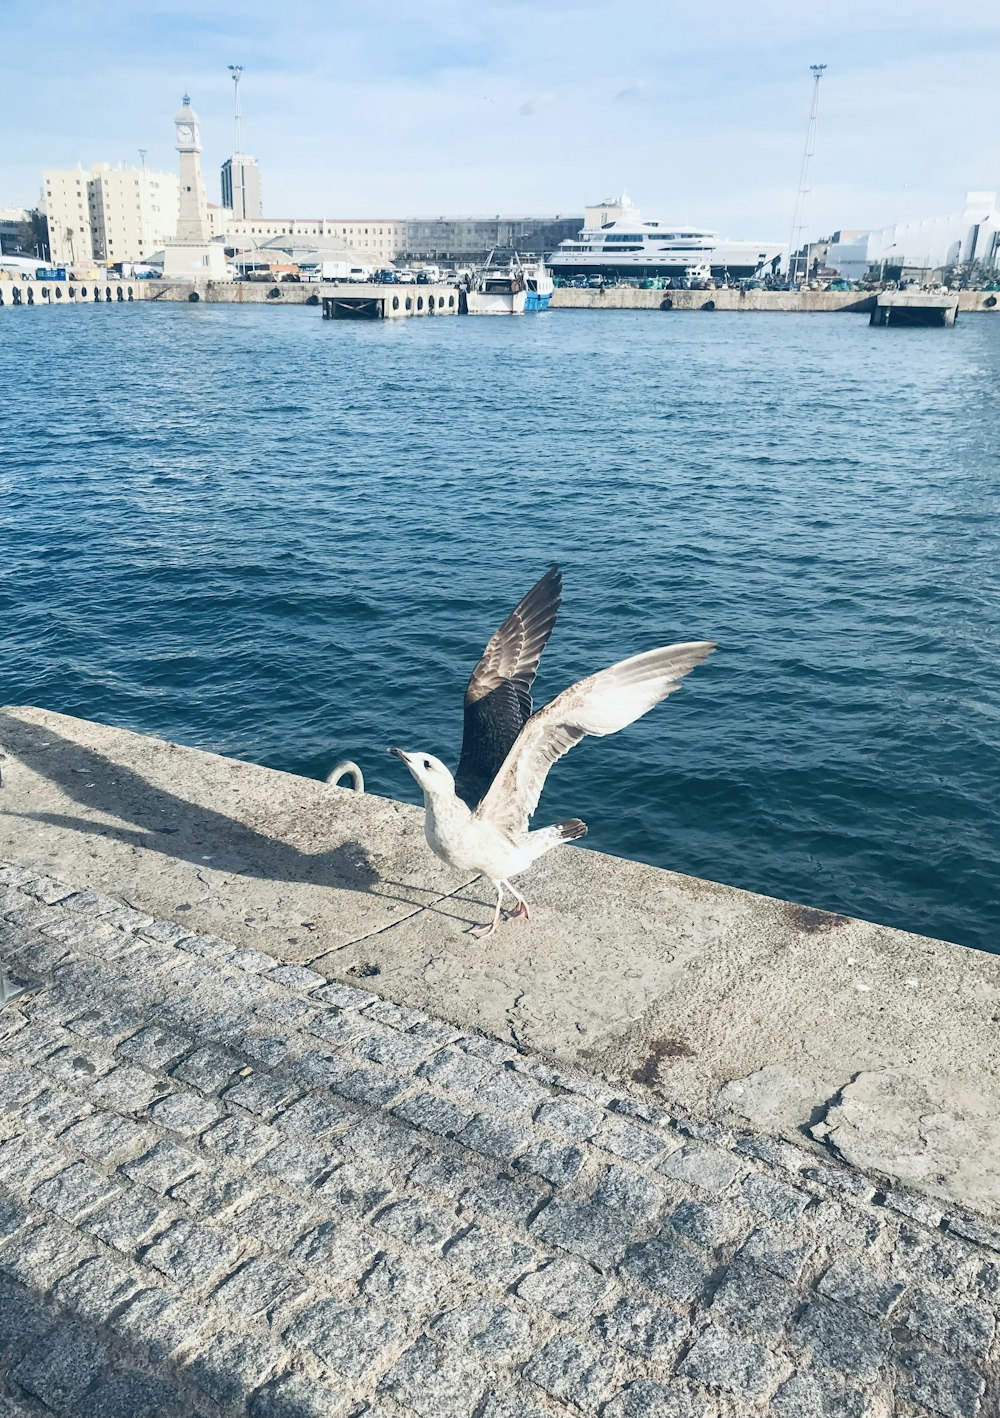 a seagull landing on the edge of a wall near the water